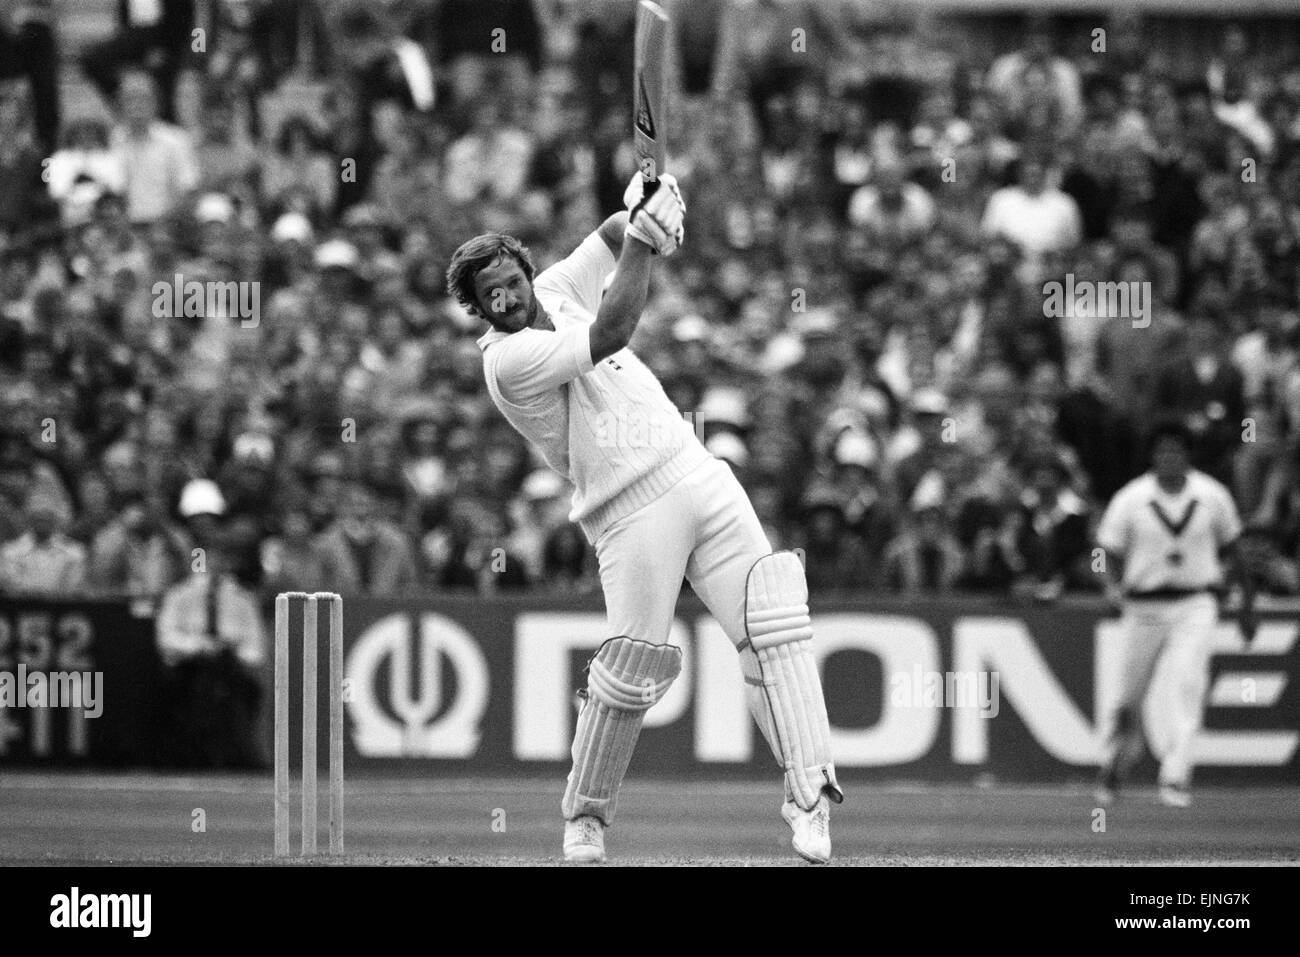 The Ashes. England v Australia 5th Test match, Day Three at Old Trafford, Manchester. England 's Ian Botham in batting action. 15th August 1981. Stock Photo